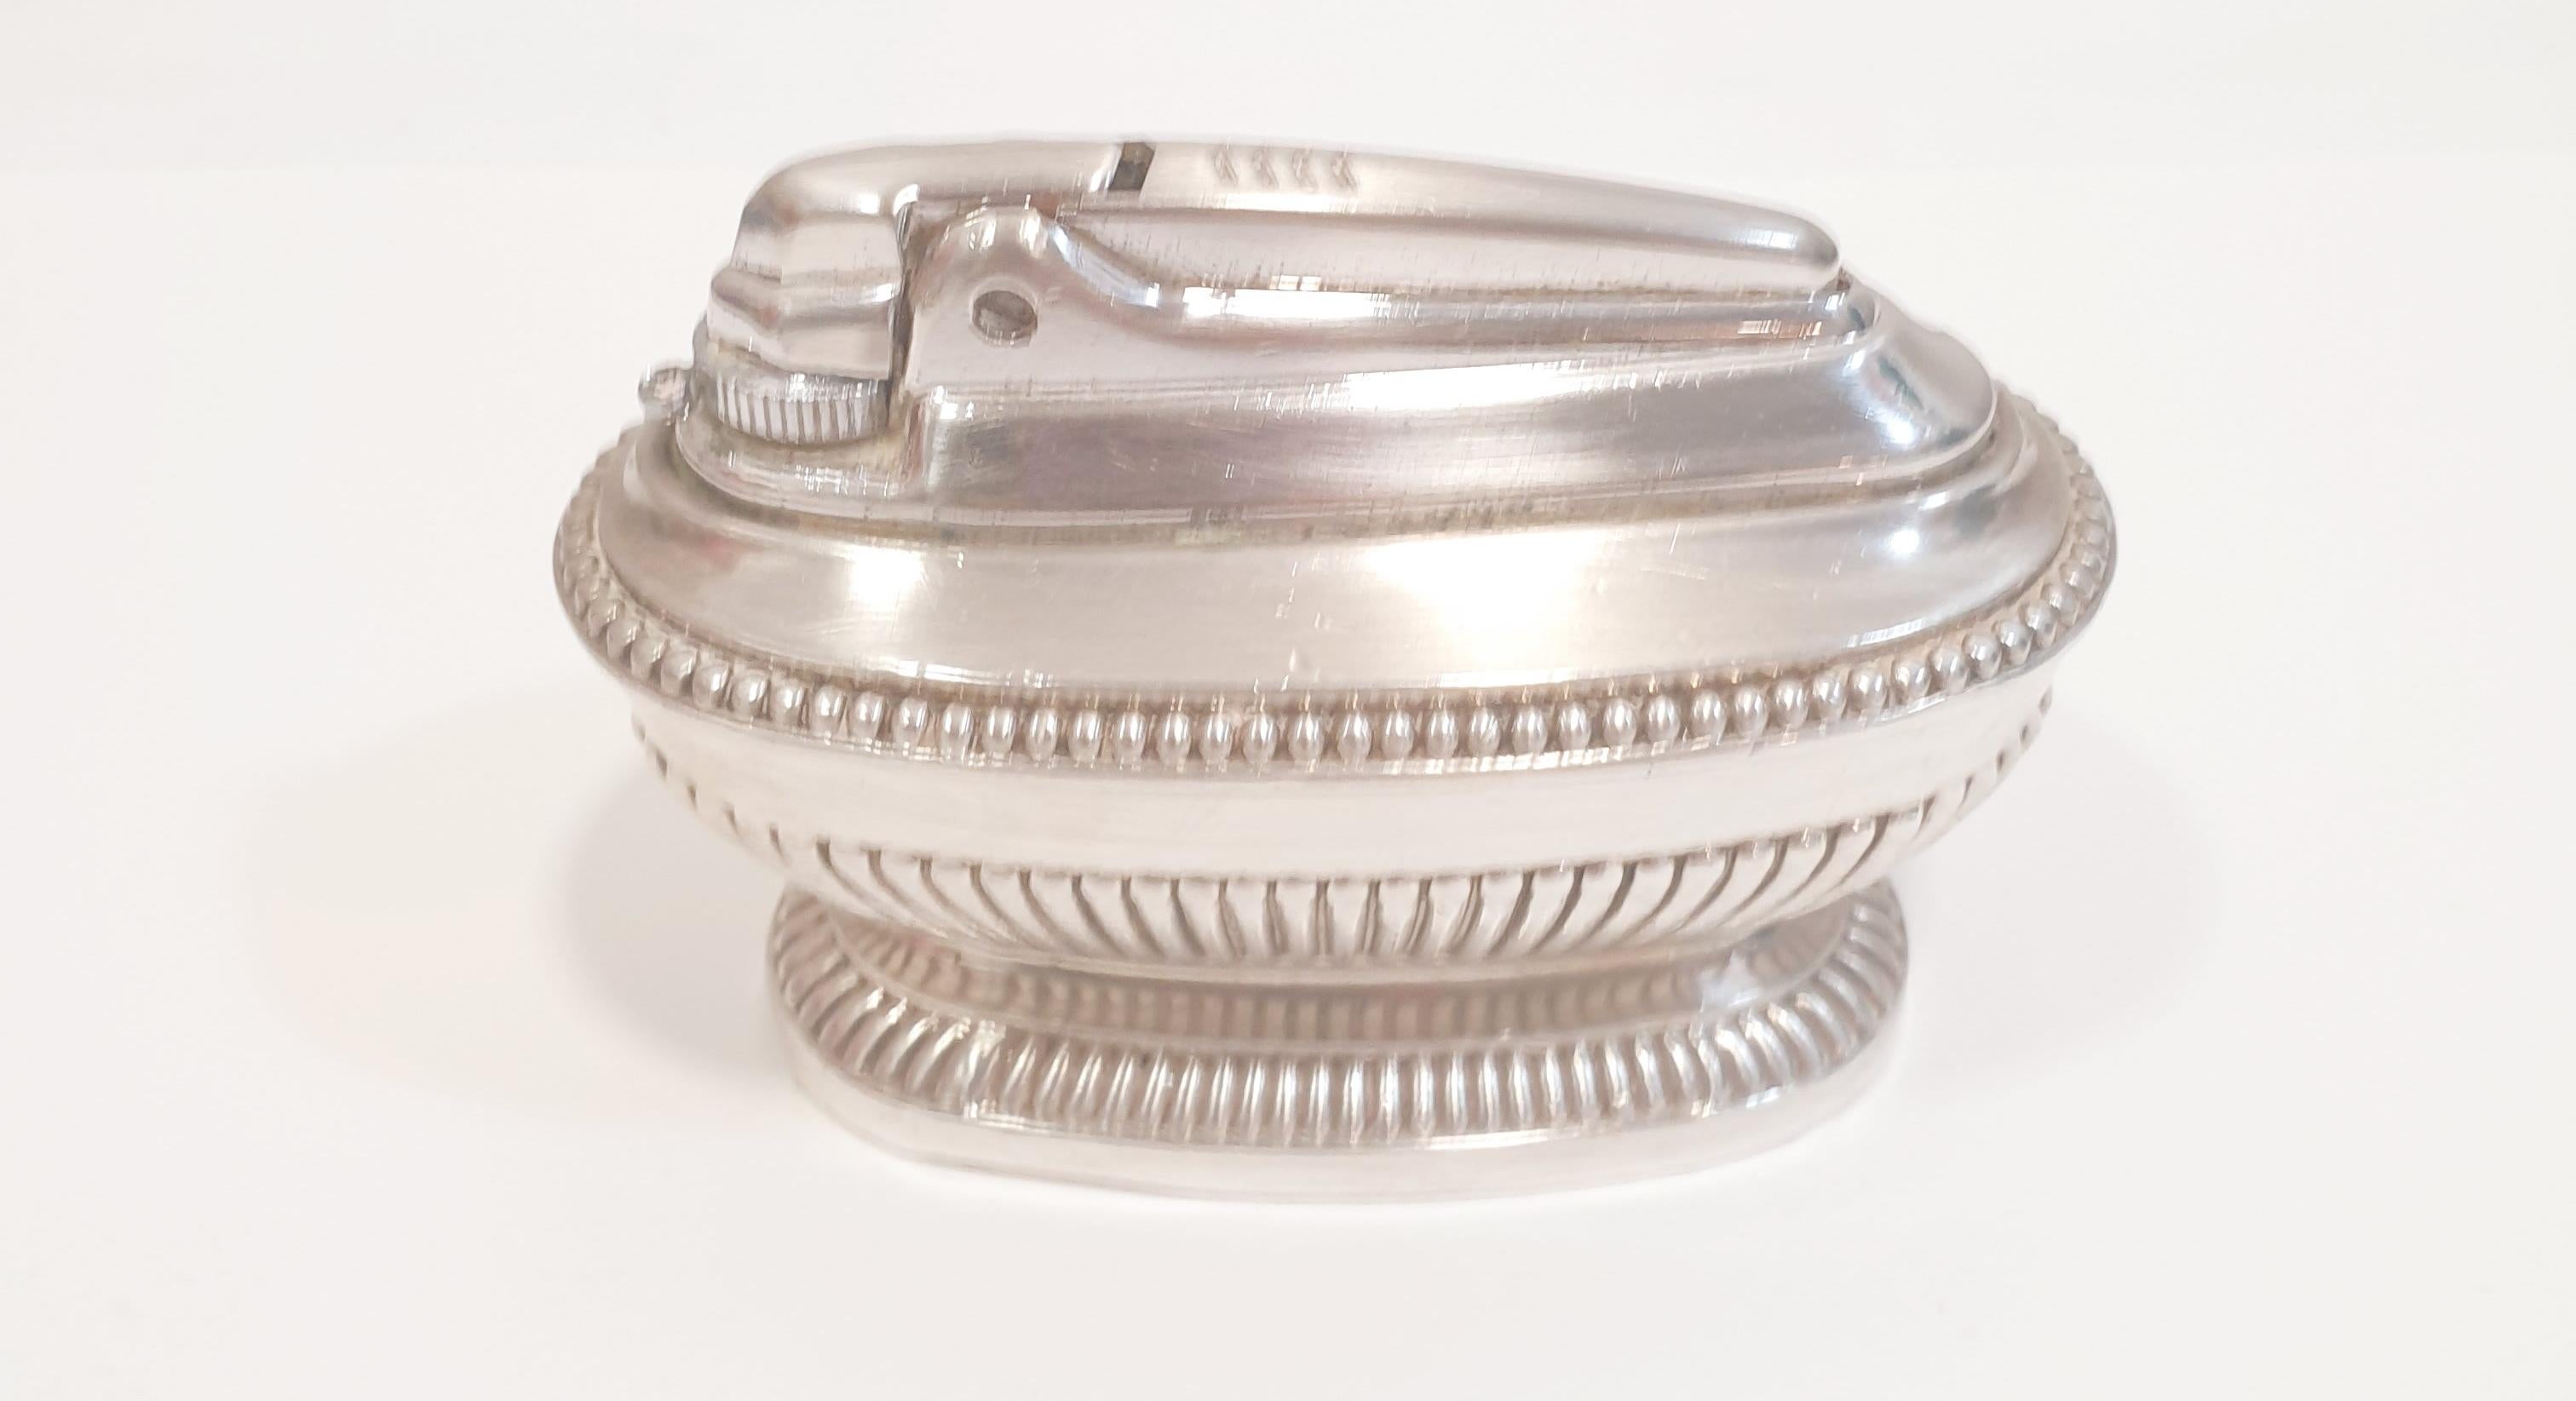 A vintage Ronson silver plated 'Queen Anne' table lighter, mid 20th century, the heavily weighted elongated oval lighter with bead and gadroon decoration upon a waisted base; mark of Ronson underside, height 6 cm, width 9 cm

PRADERA is a second